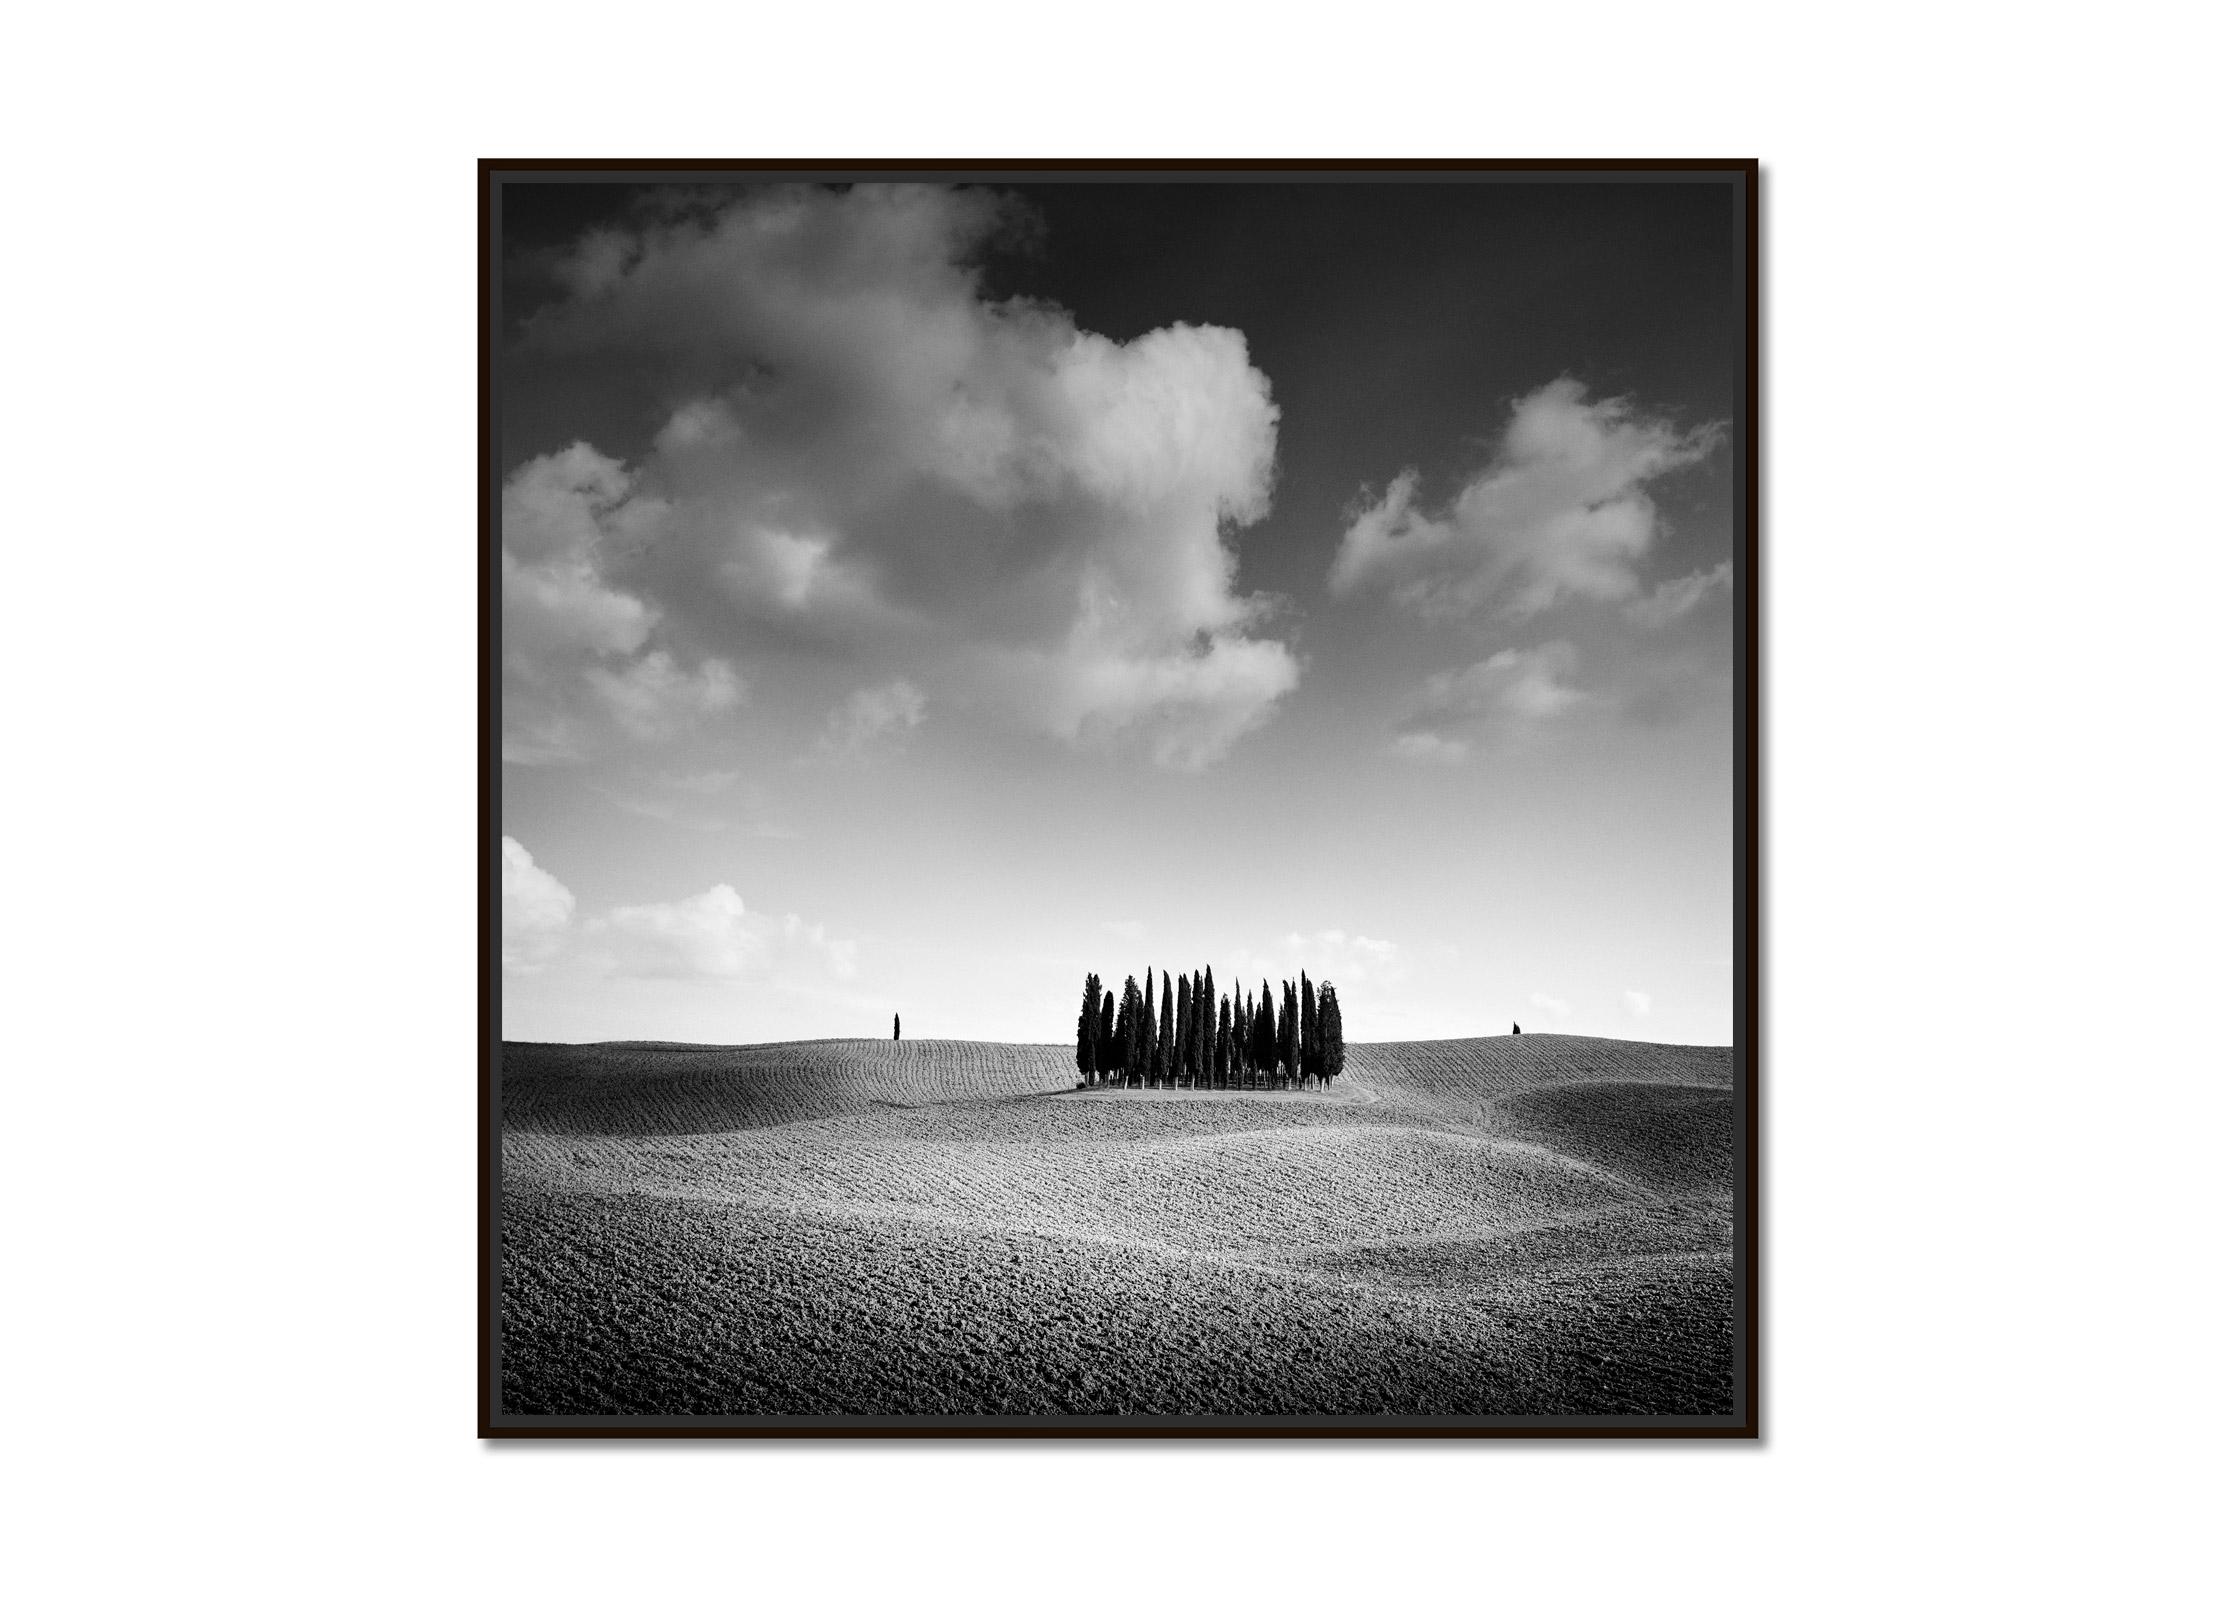   Cypress Hill, Trees, Tuscany, Italy, black and white photography, landscaspe - Photograph by Gerald Berghammer